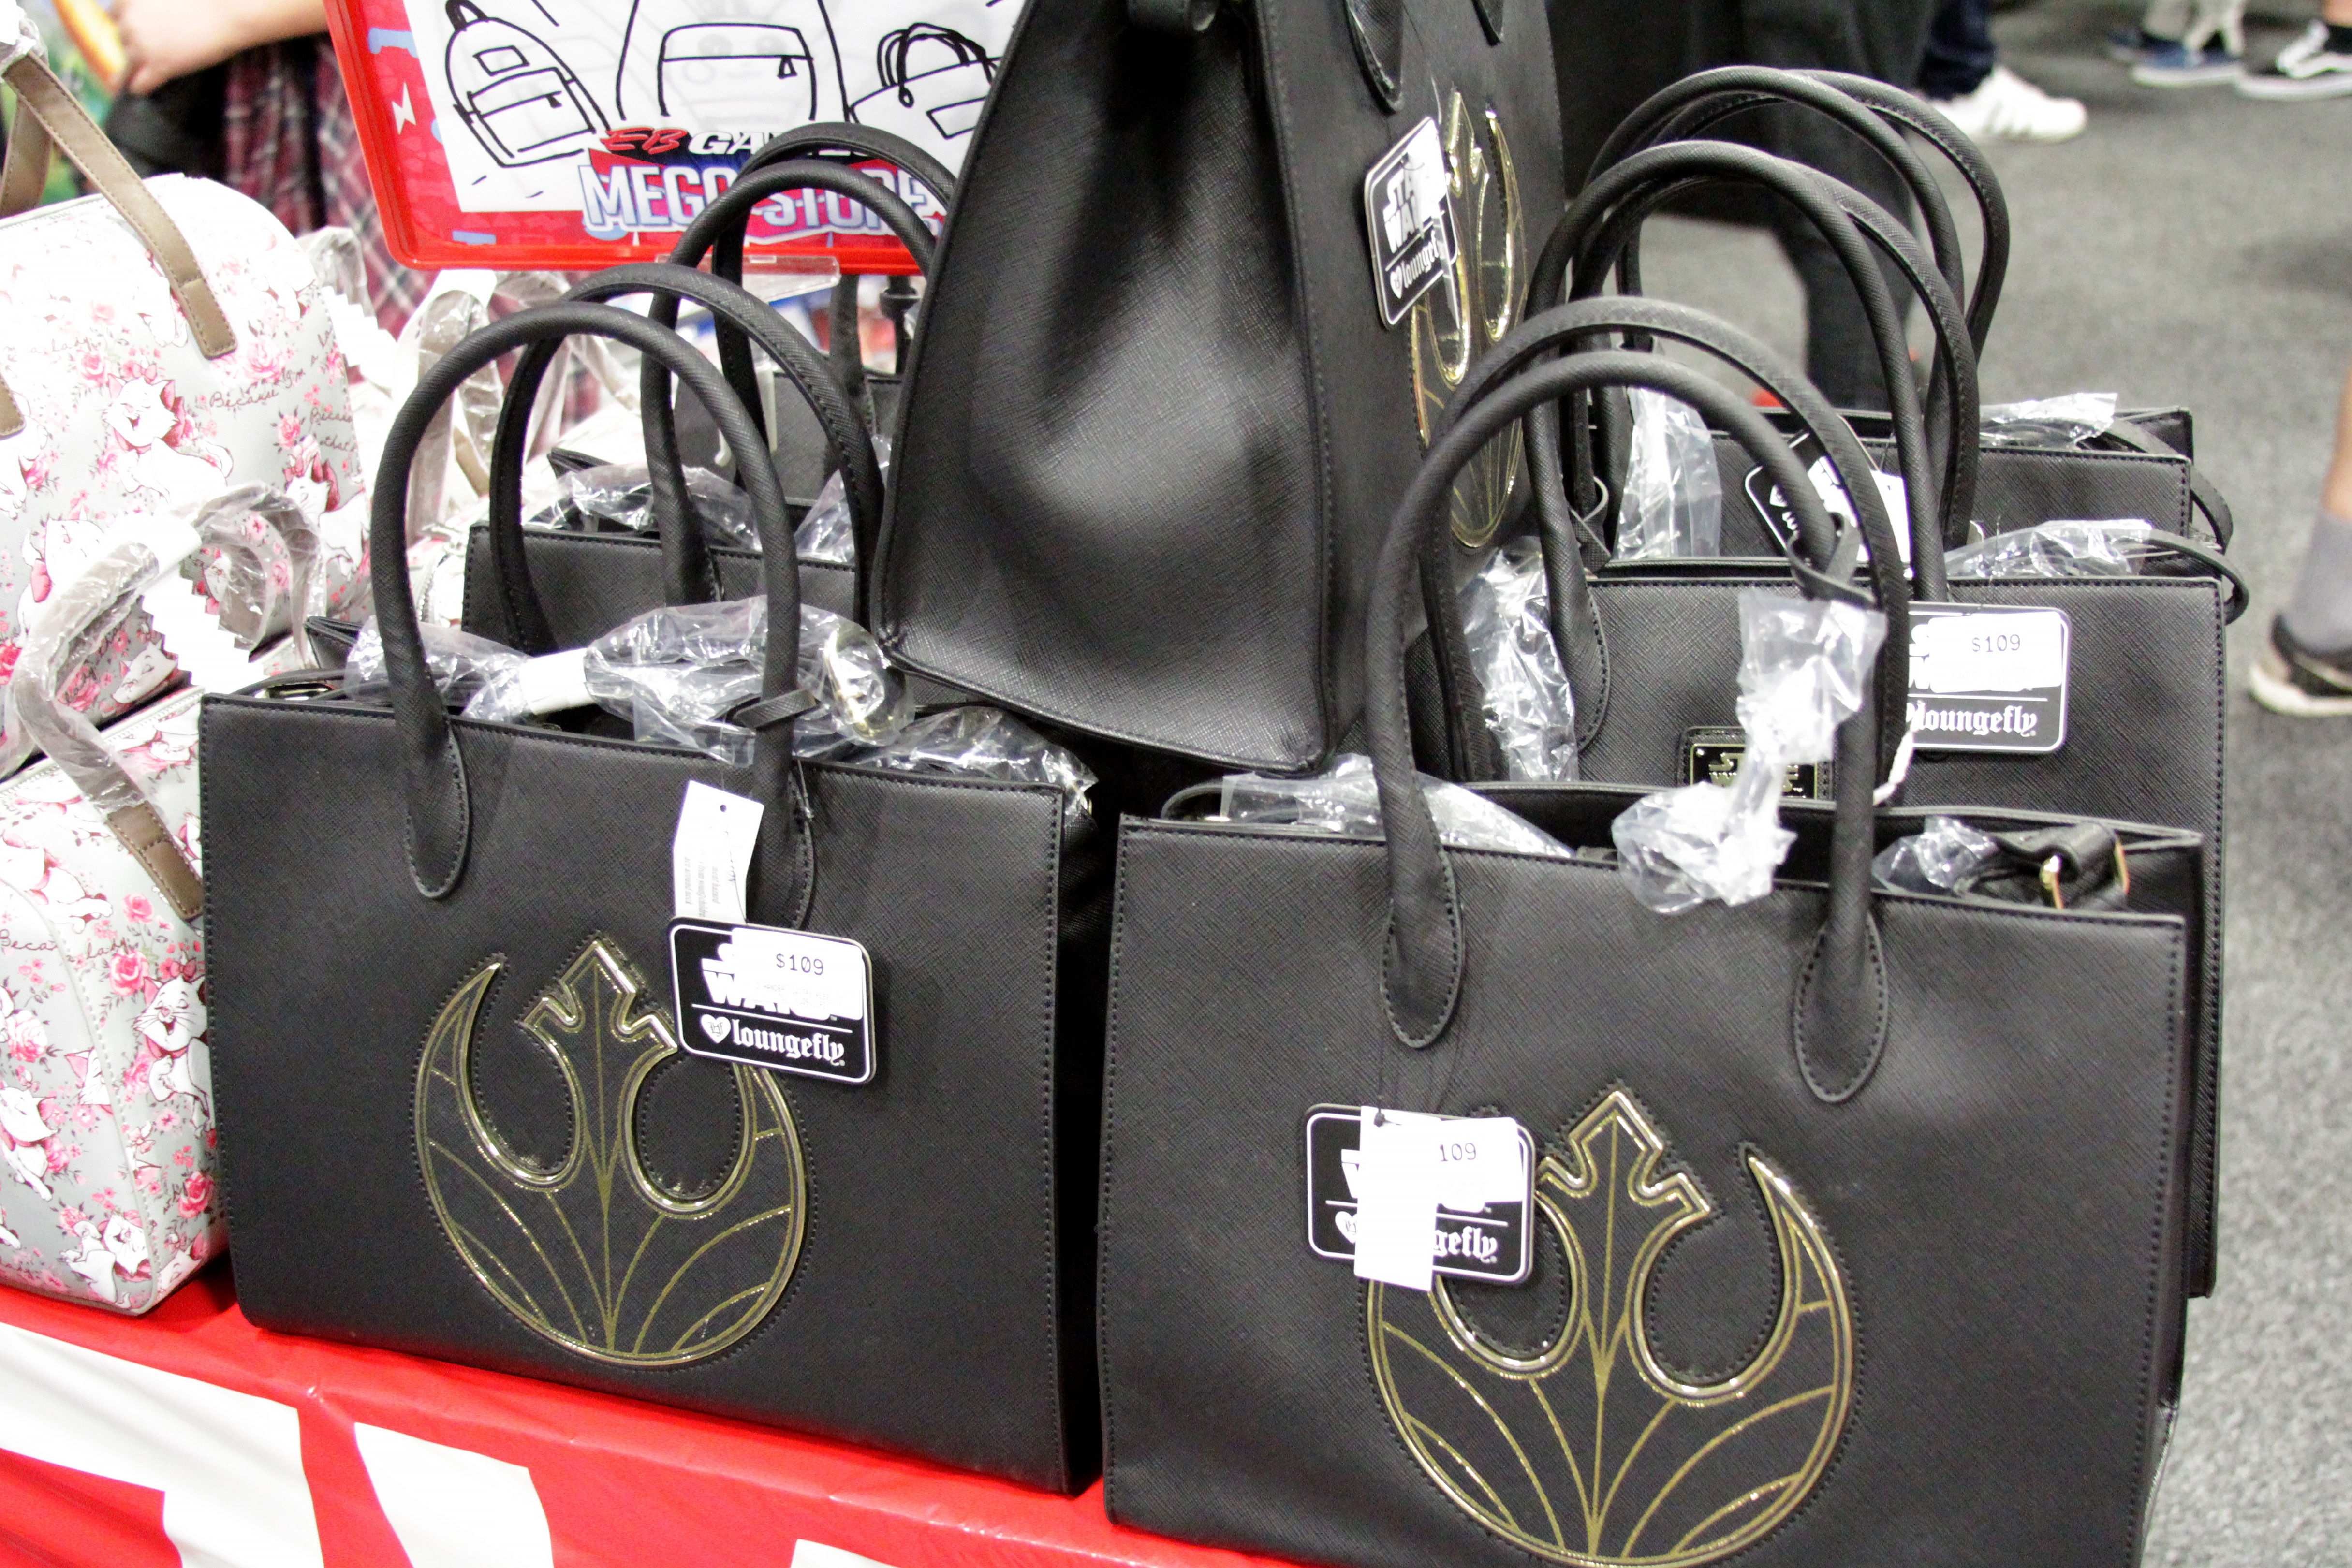 Loungefly x Star Wars Bags and Wallets at the EB Games booth at Armageddon Expo Auckland 2018